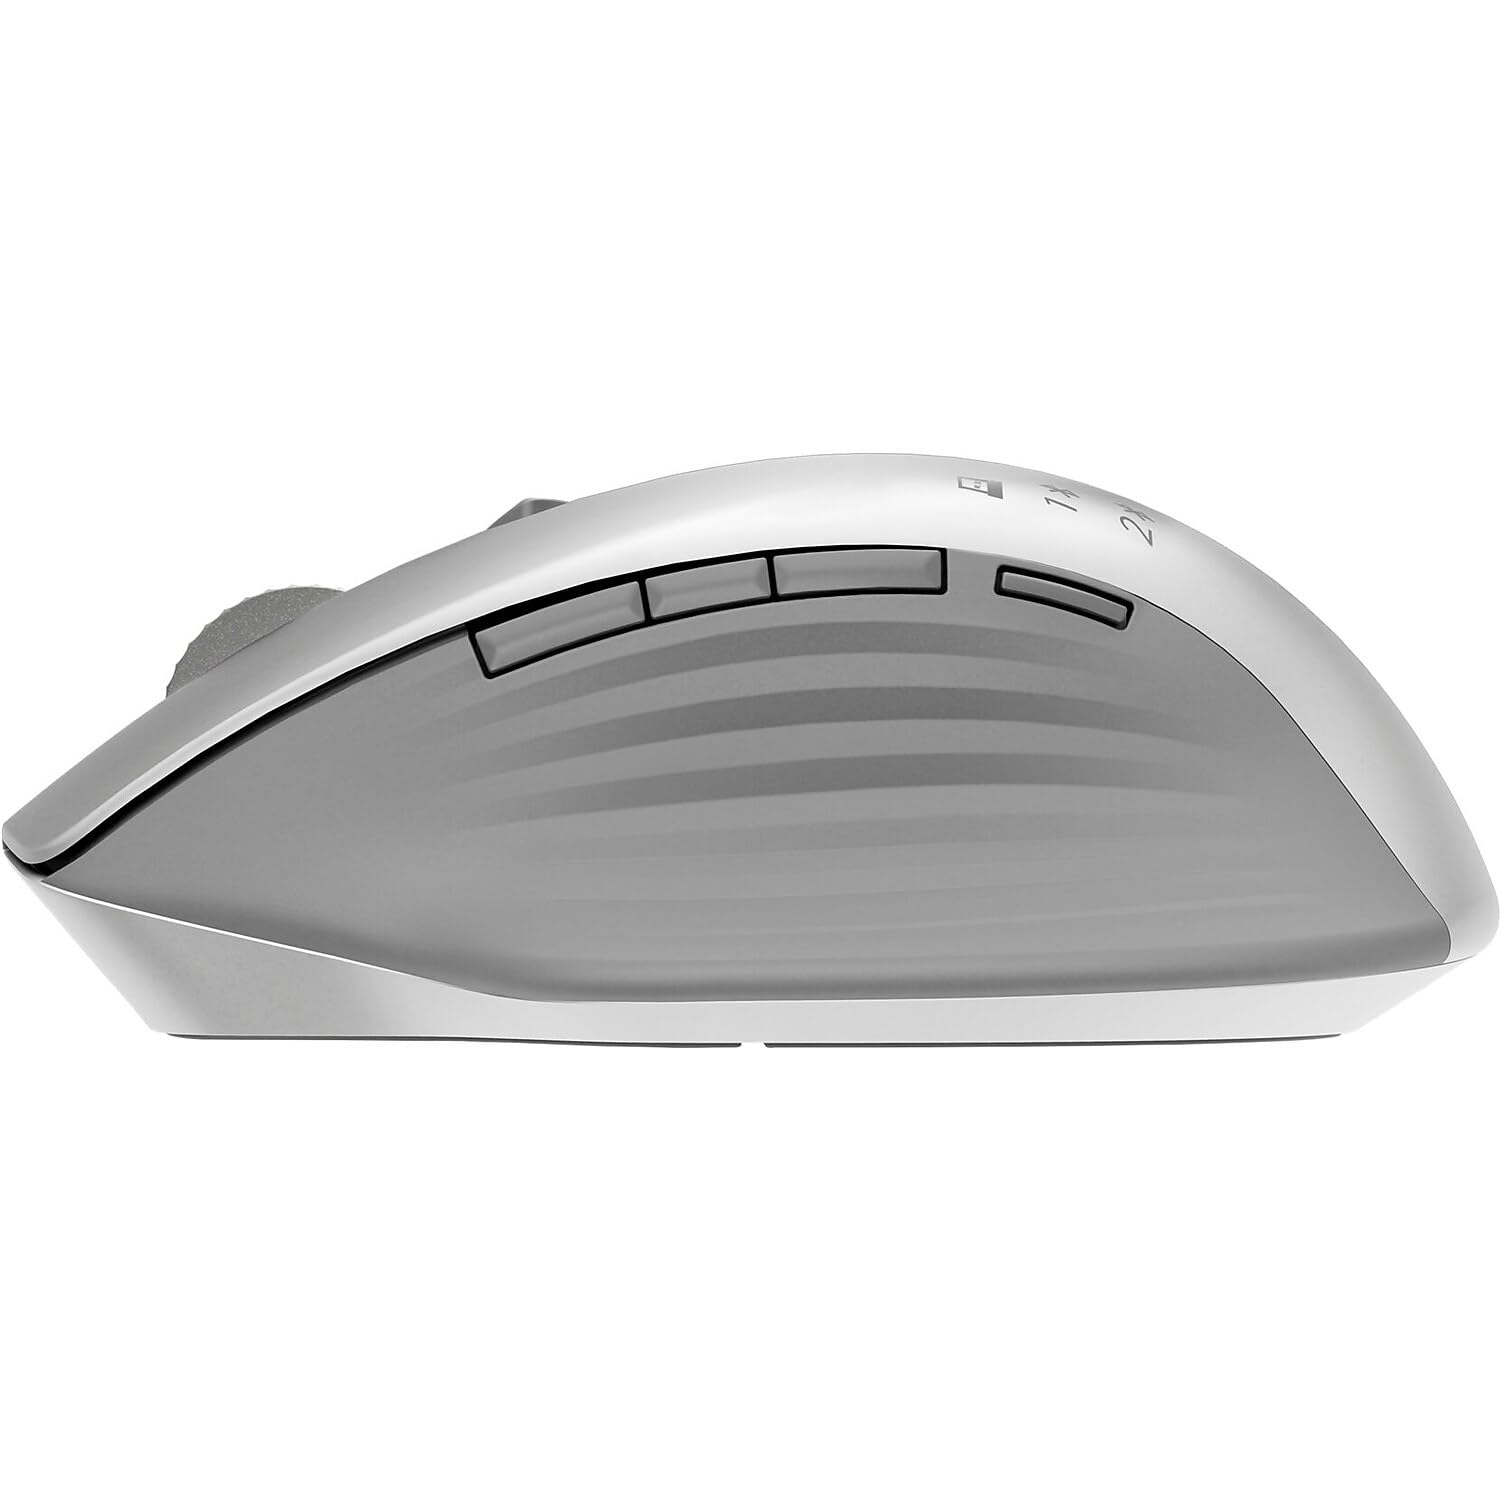 HP 930 Creator Wireless Mouse - Bluetooth or Wired Compatible with USB-A Dongle - 7 Programmable Buttons - Ergonomic Grip - Quiet Click and Scroll - Battery Life Up to 12 Weeks - Track-on-Glass Sensor